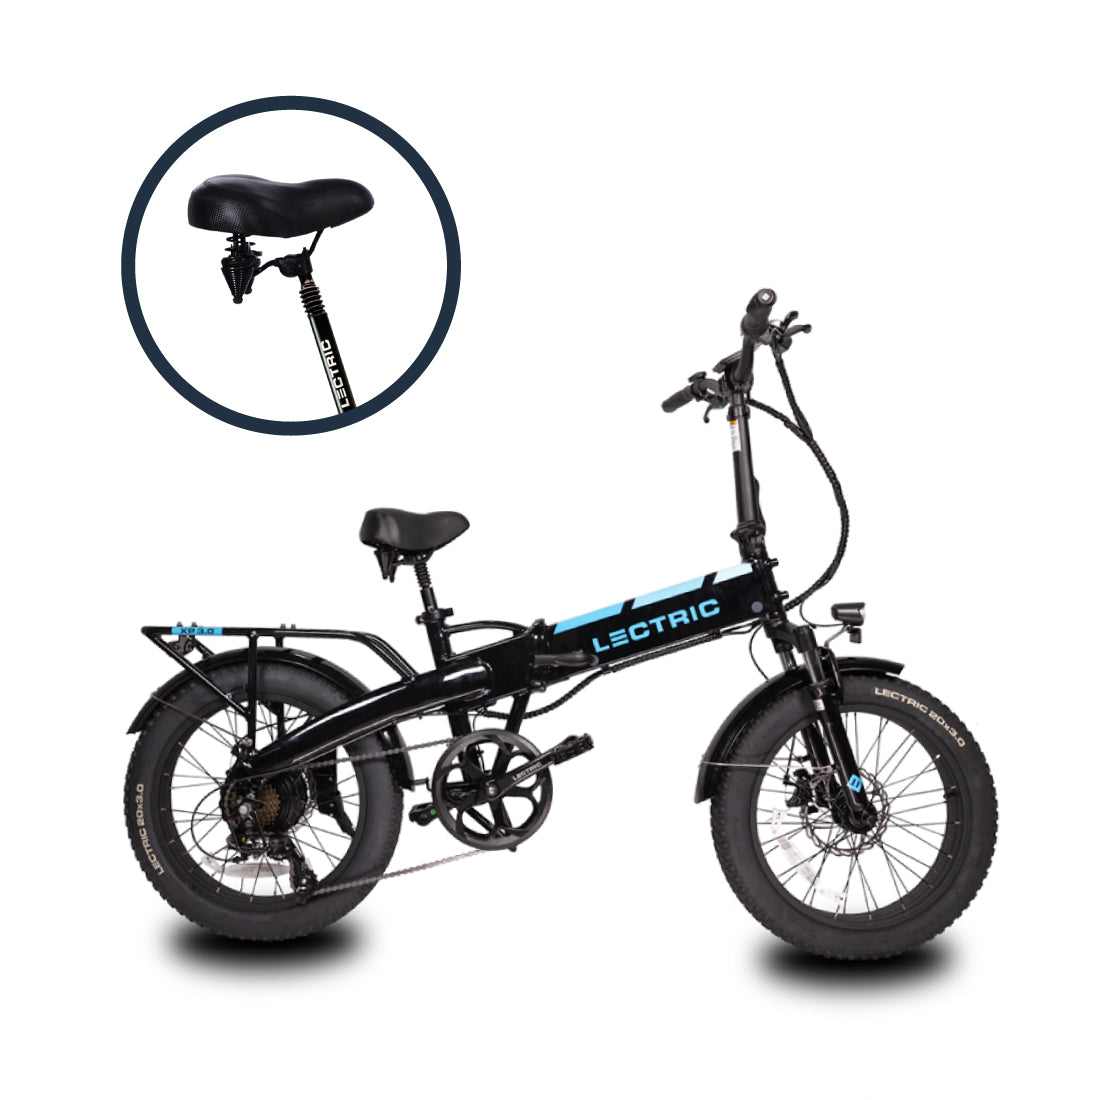 Class 3 electric bicycle with a comfort package installed